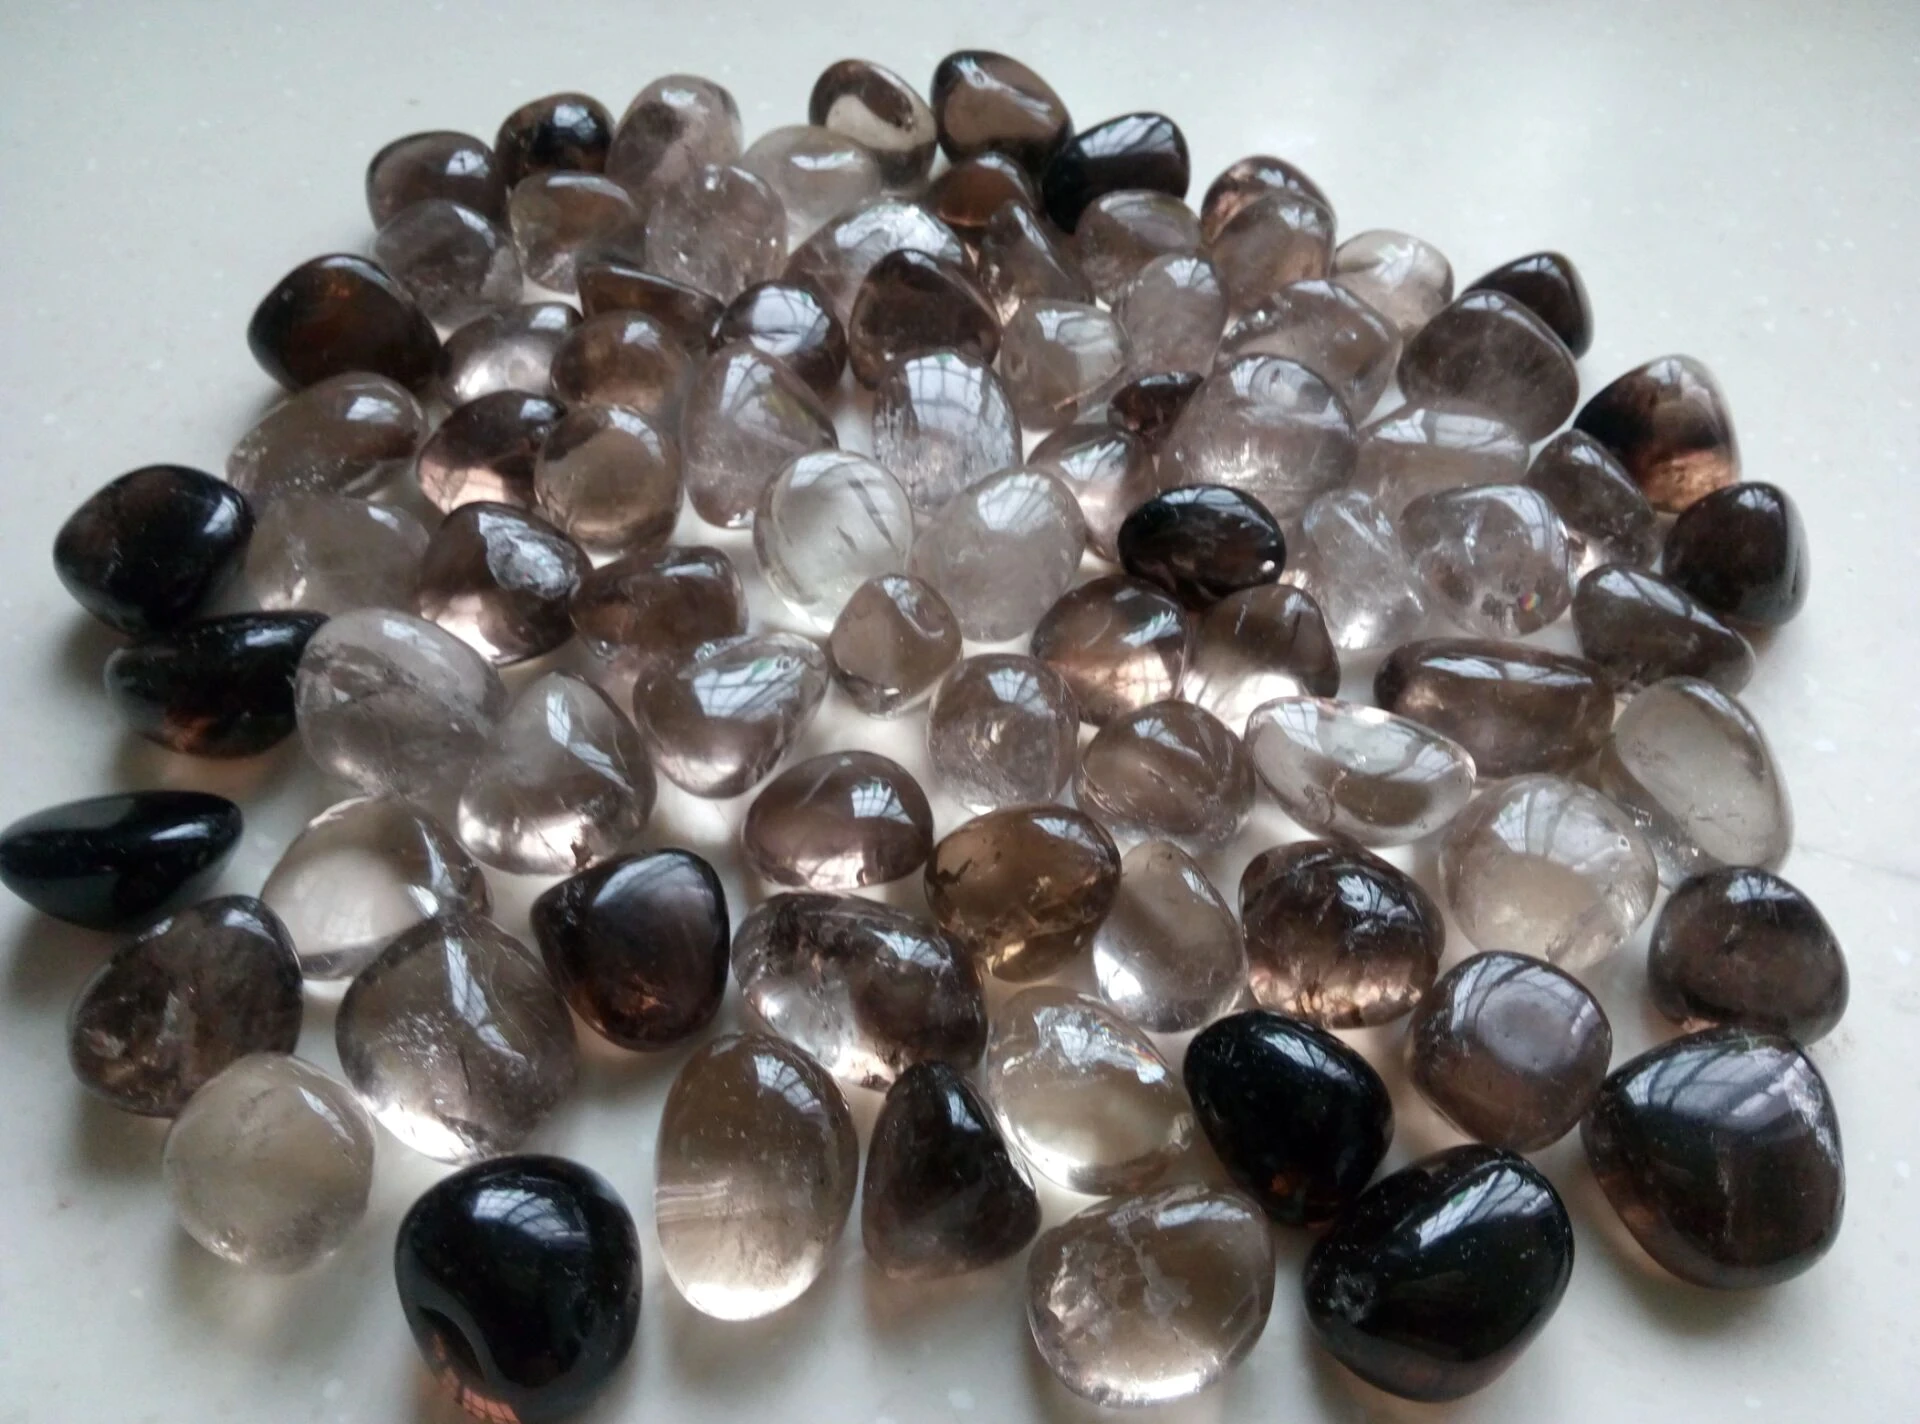 A Number Of Polished Smoky Quartz Crystals On White-Colored surface